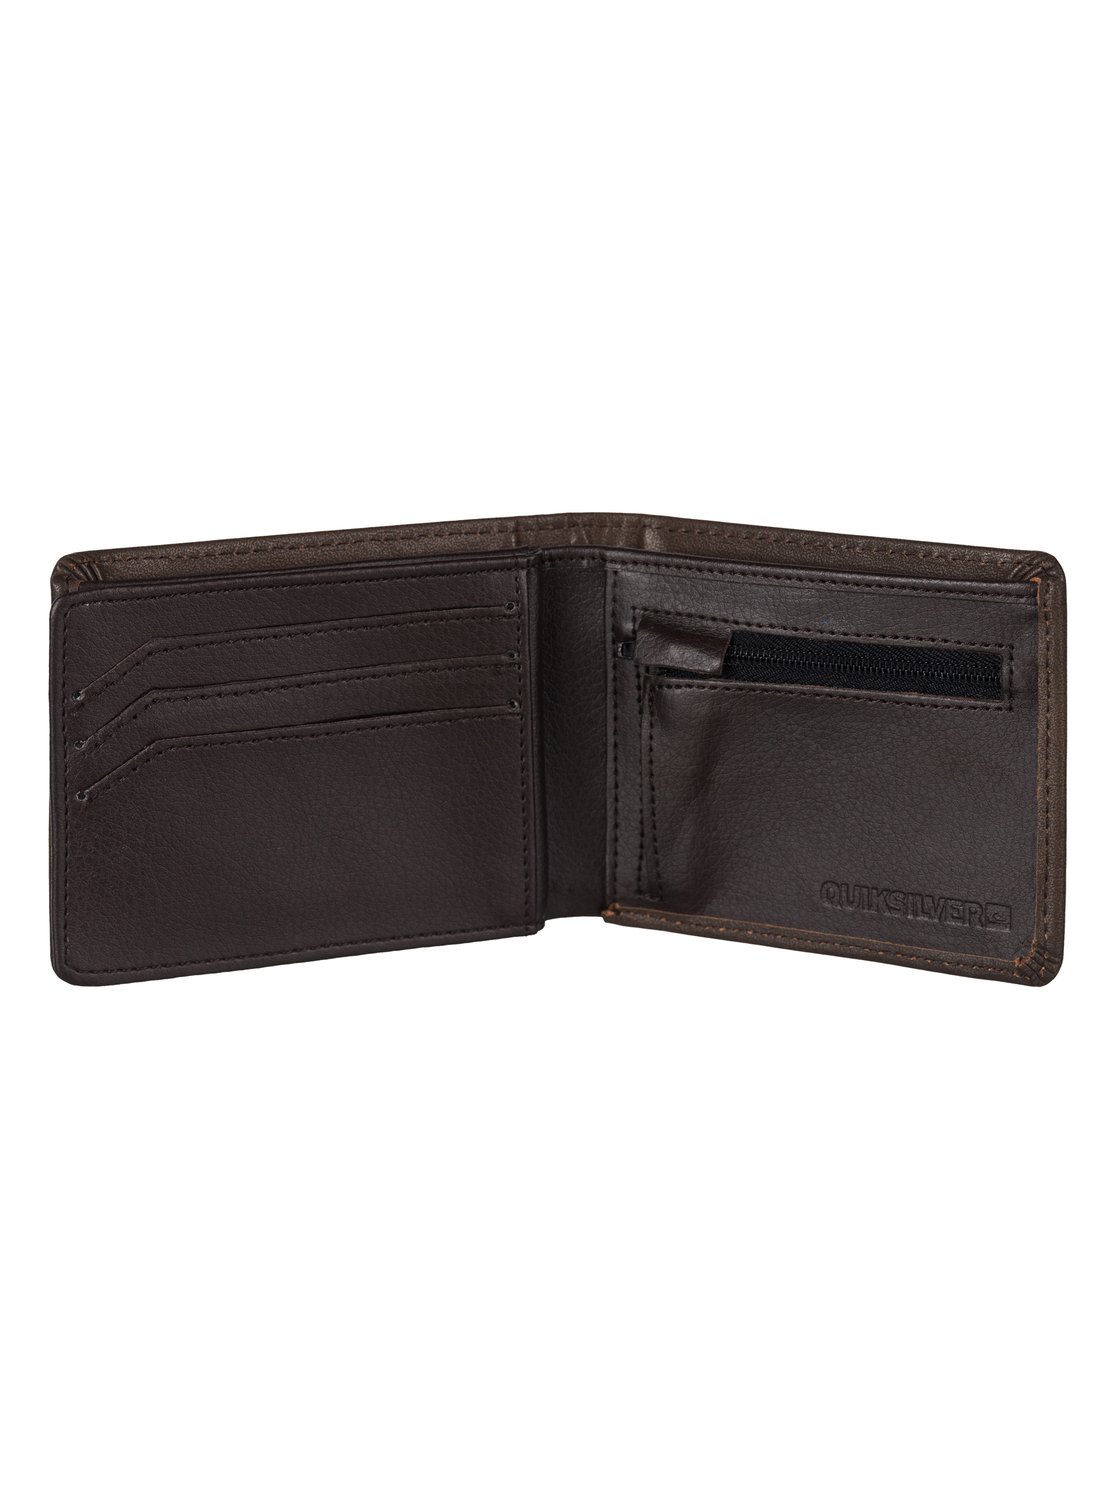 Mack Daddy Leather Wallet UQYAA03019 | Quiksilver